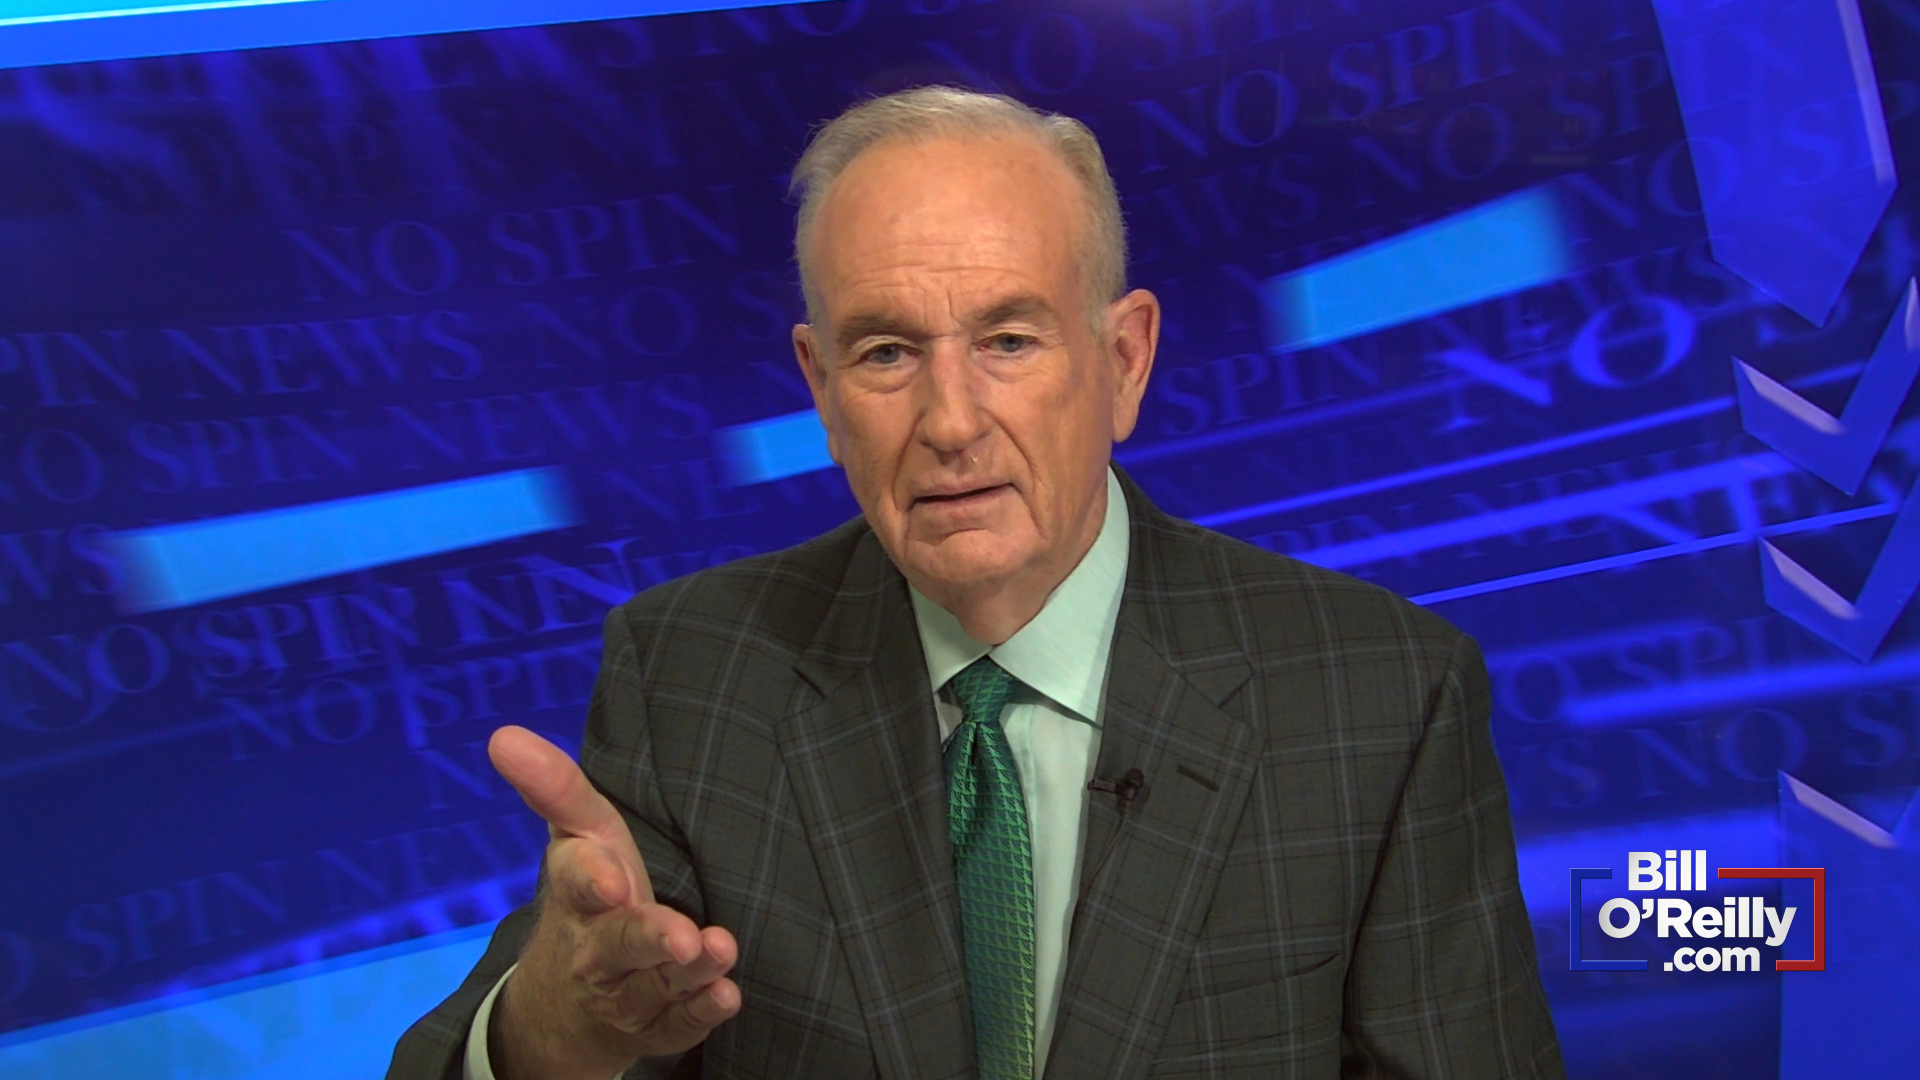 O'Reilly: 'This Society is Screwed Up!'